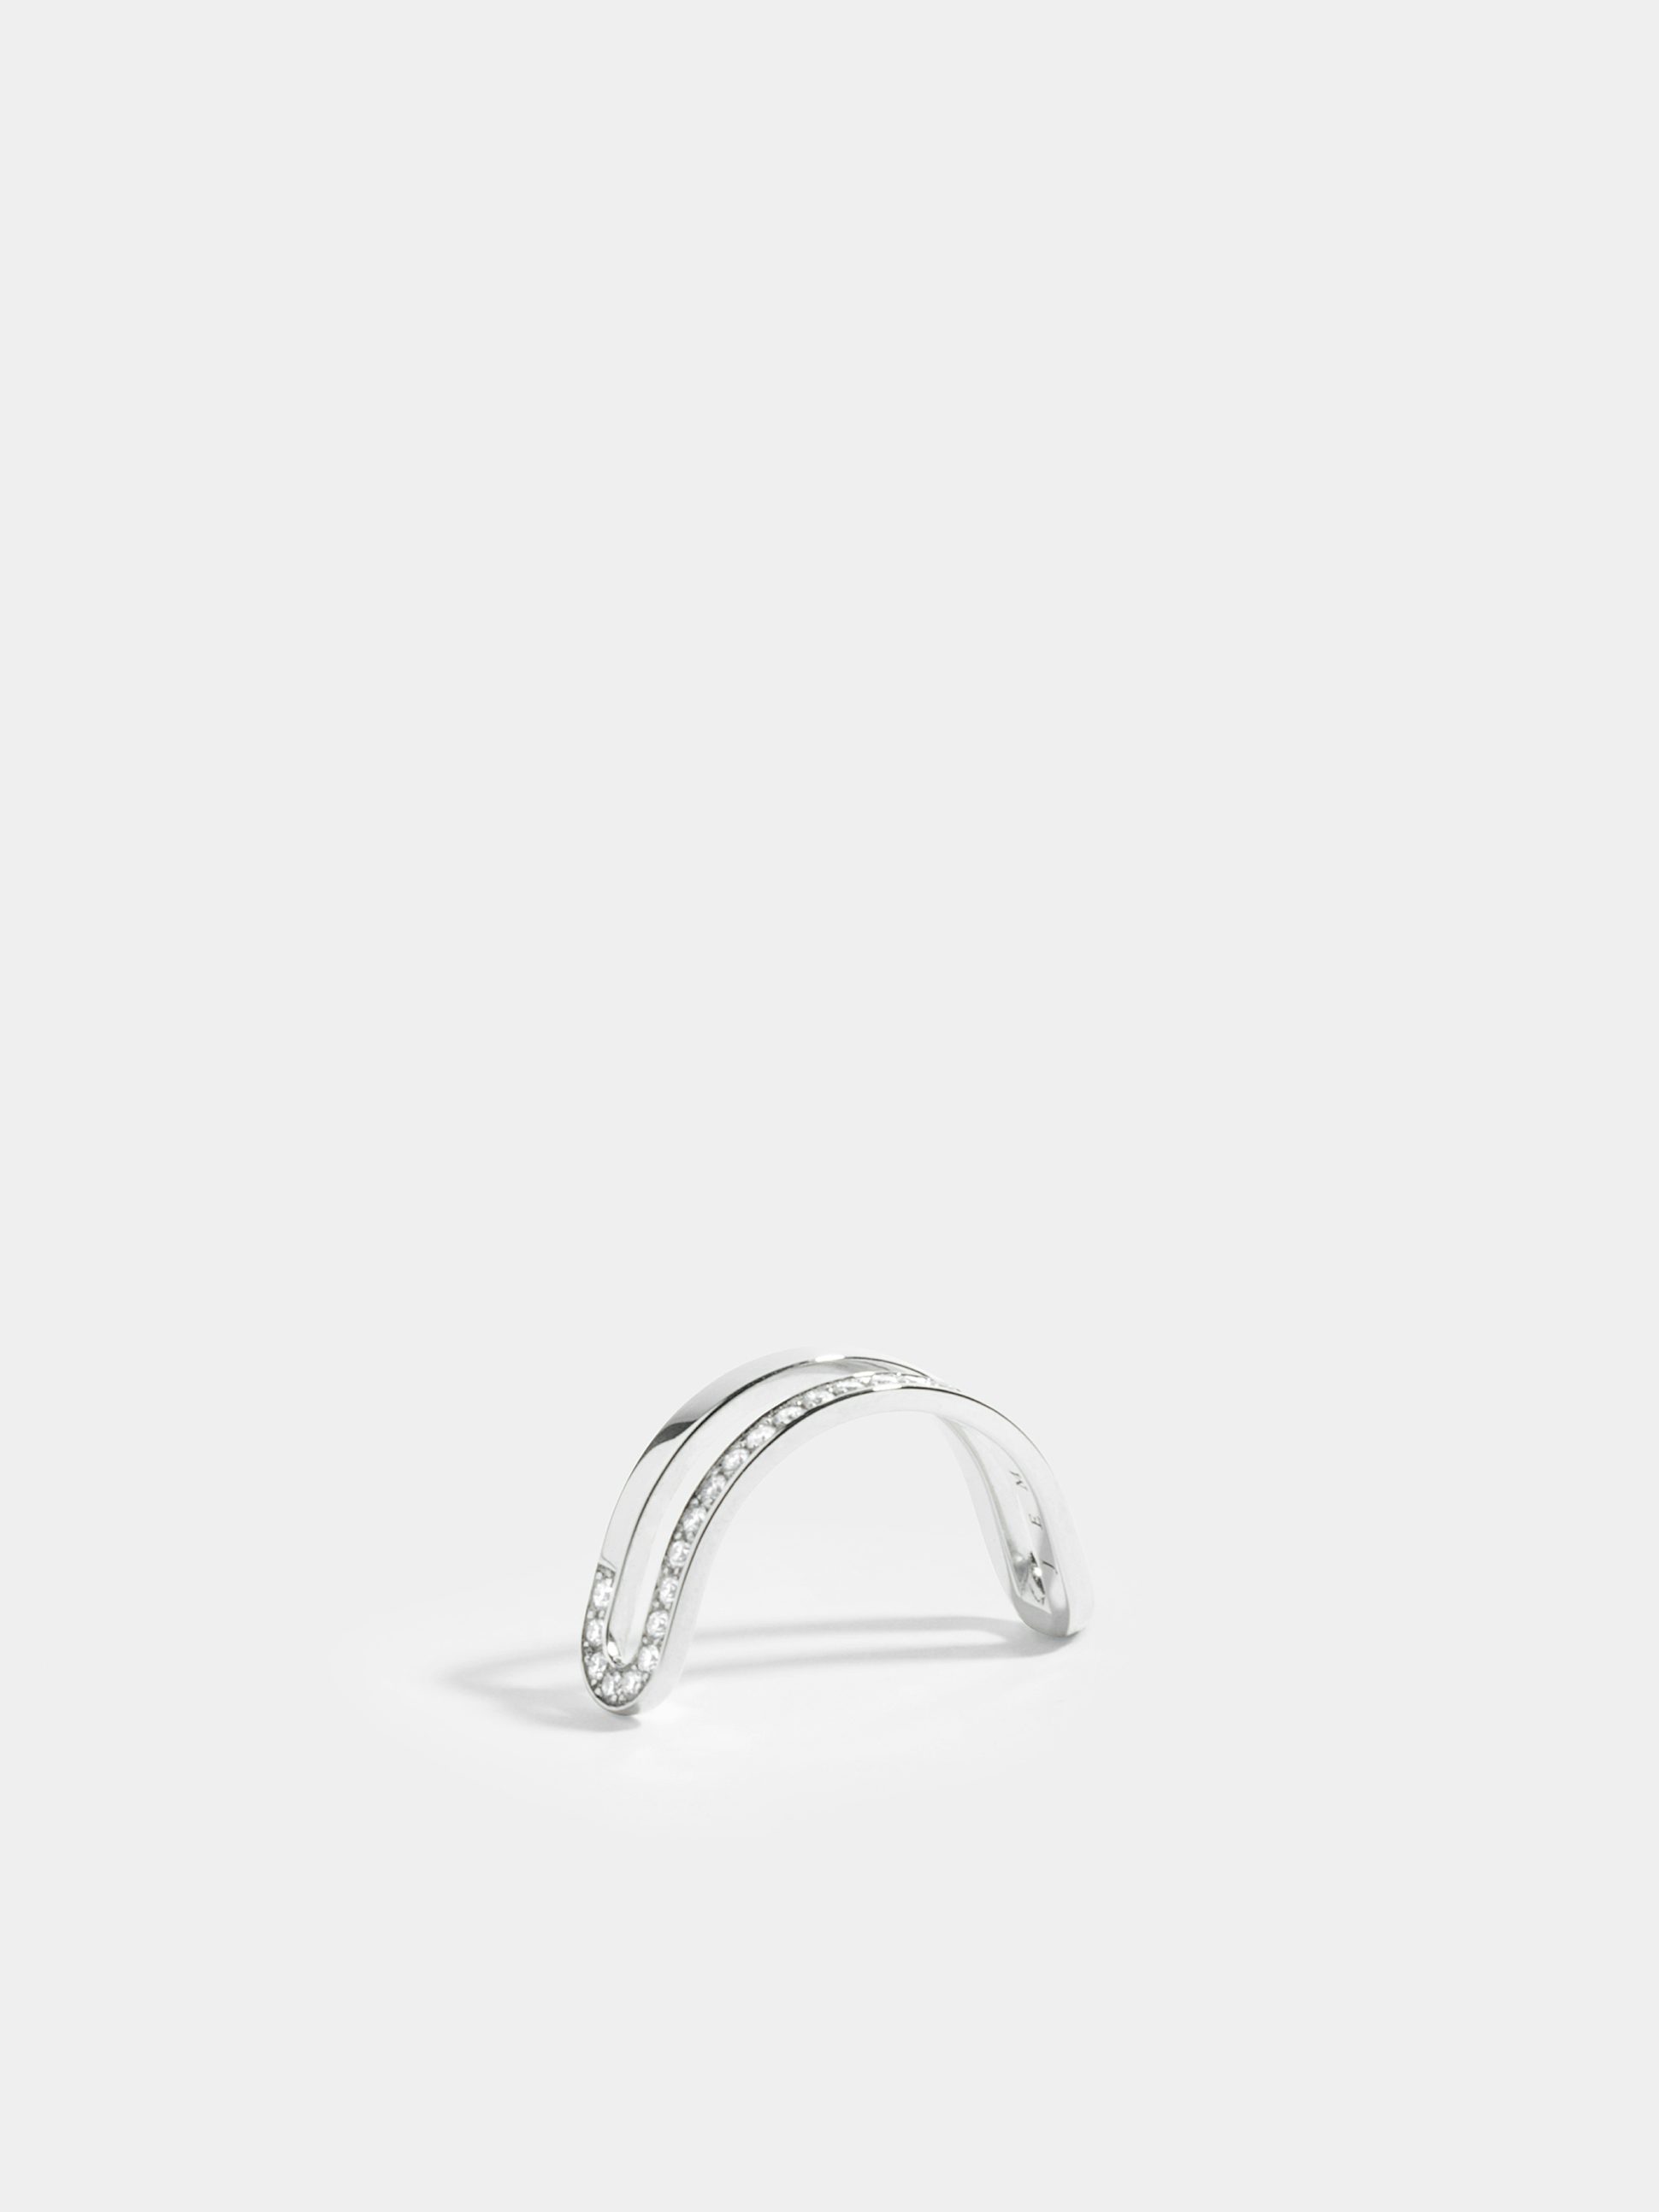 Étreintes simple half-ring in 18k Fairmined ethical white gold, paved with lab-grown diamonds on one line.